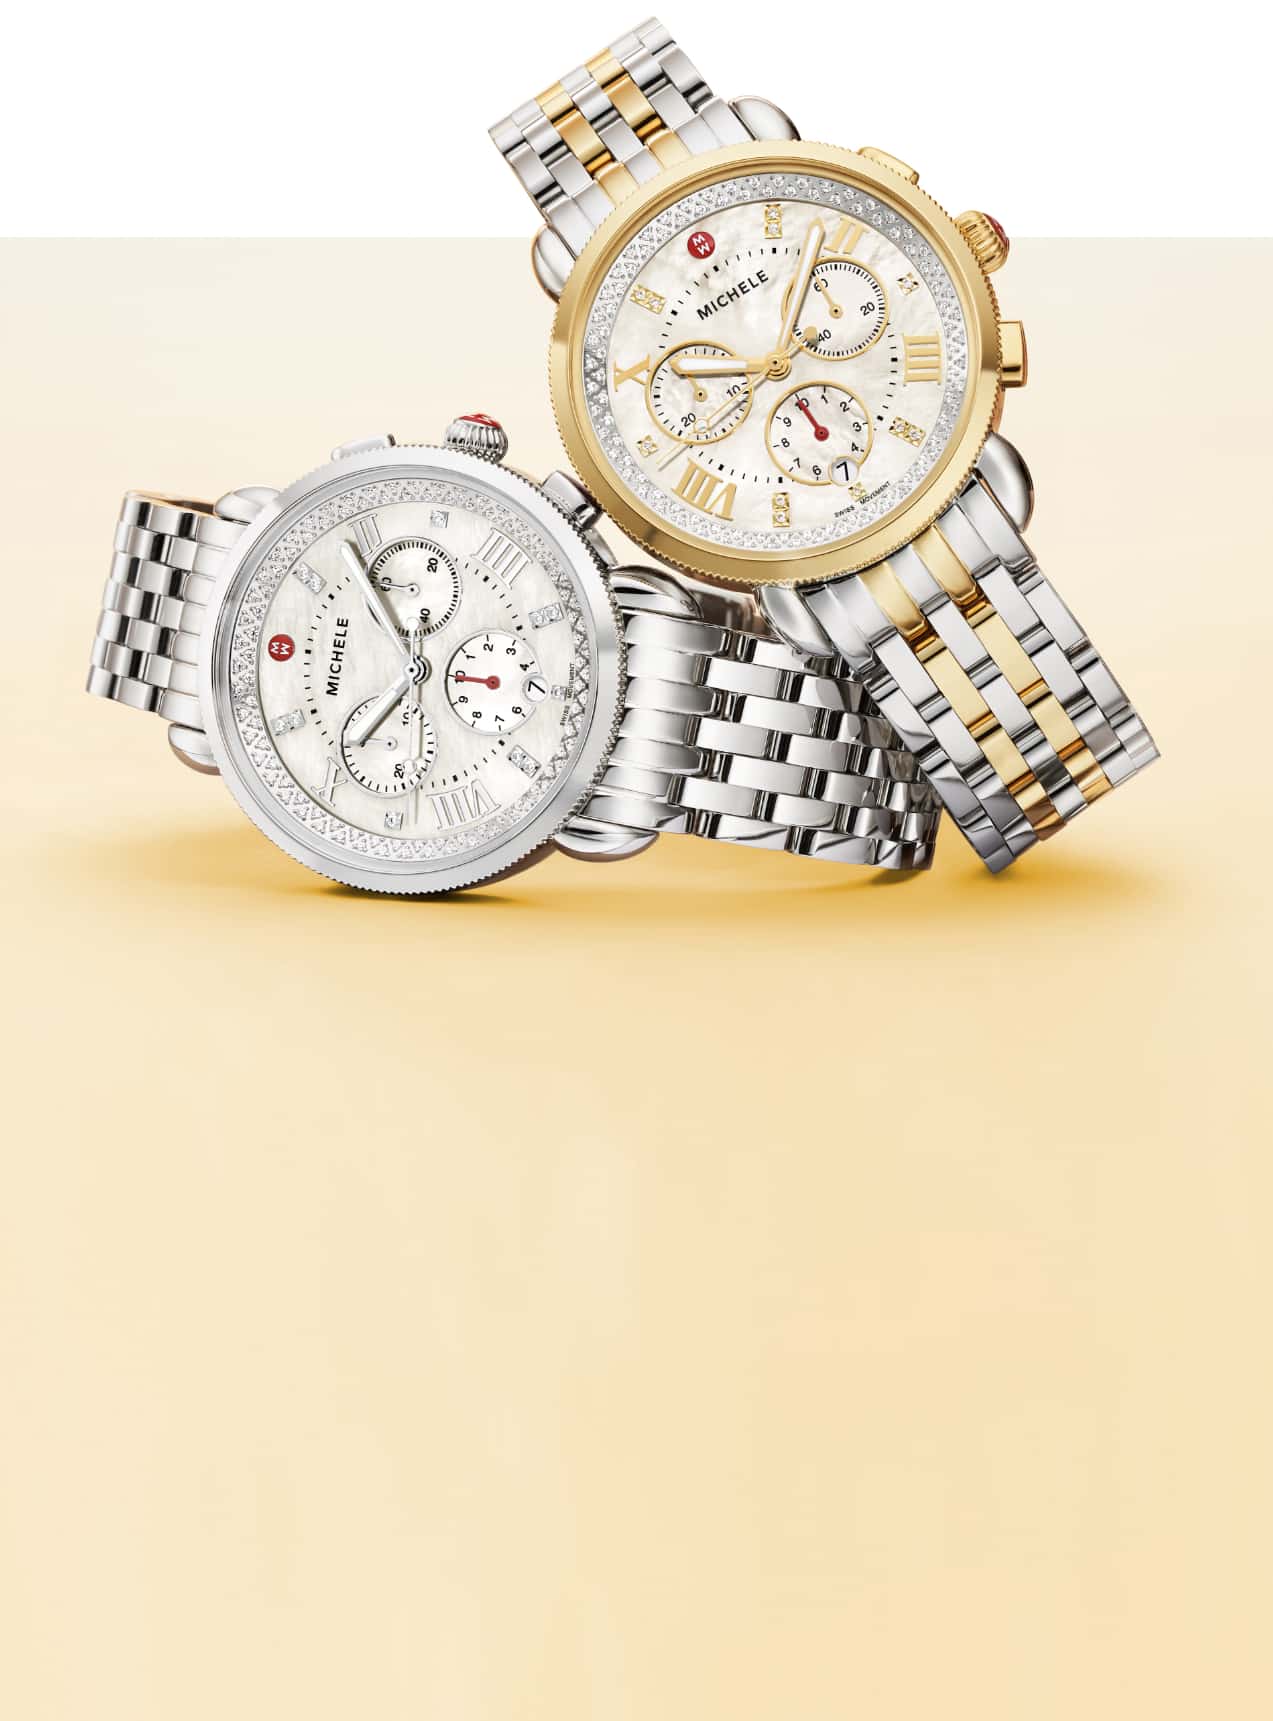 Two Sport Sail watches in stainless and two-tone with stianless and 18K gold-plating